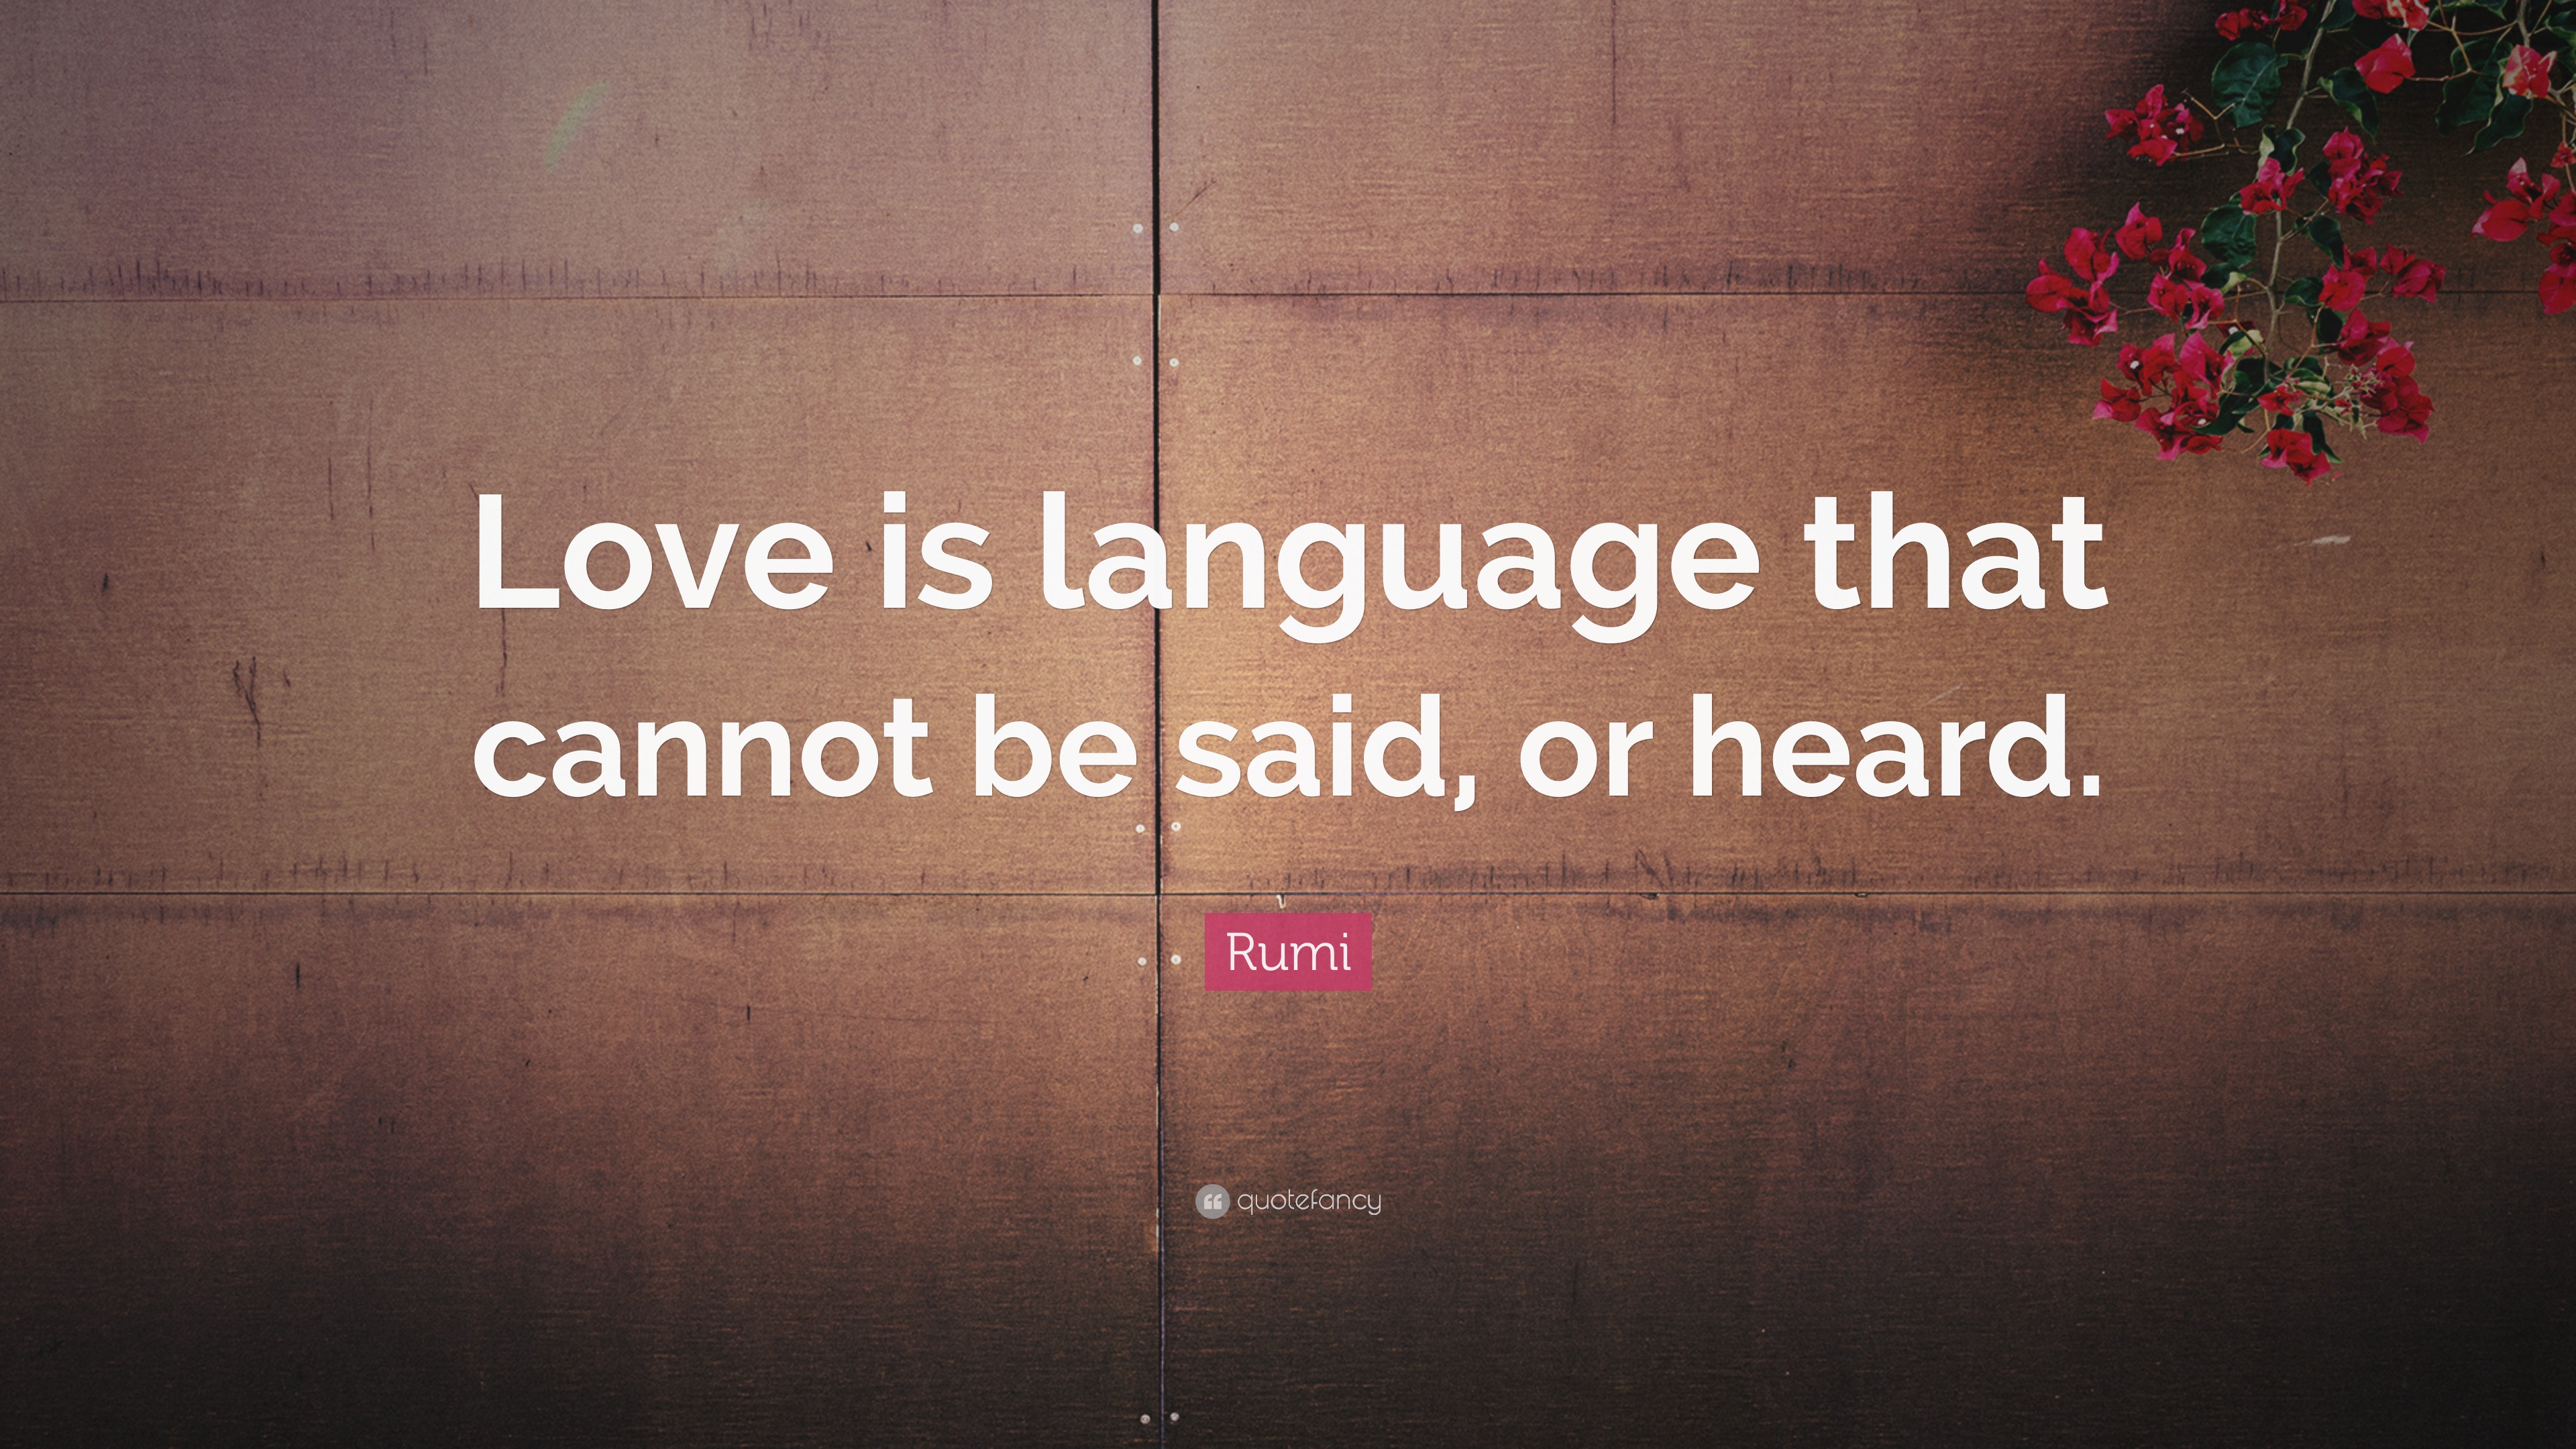 Rumi Quote: “Love is language that cannot be said, or heard.”